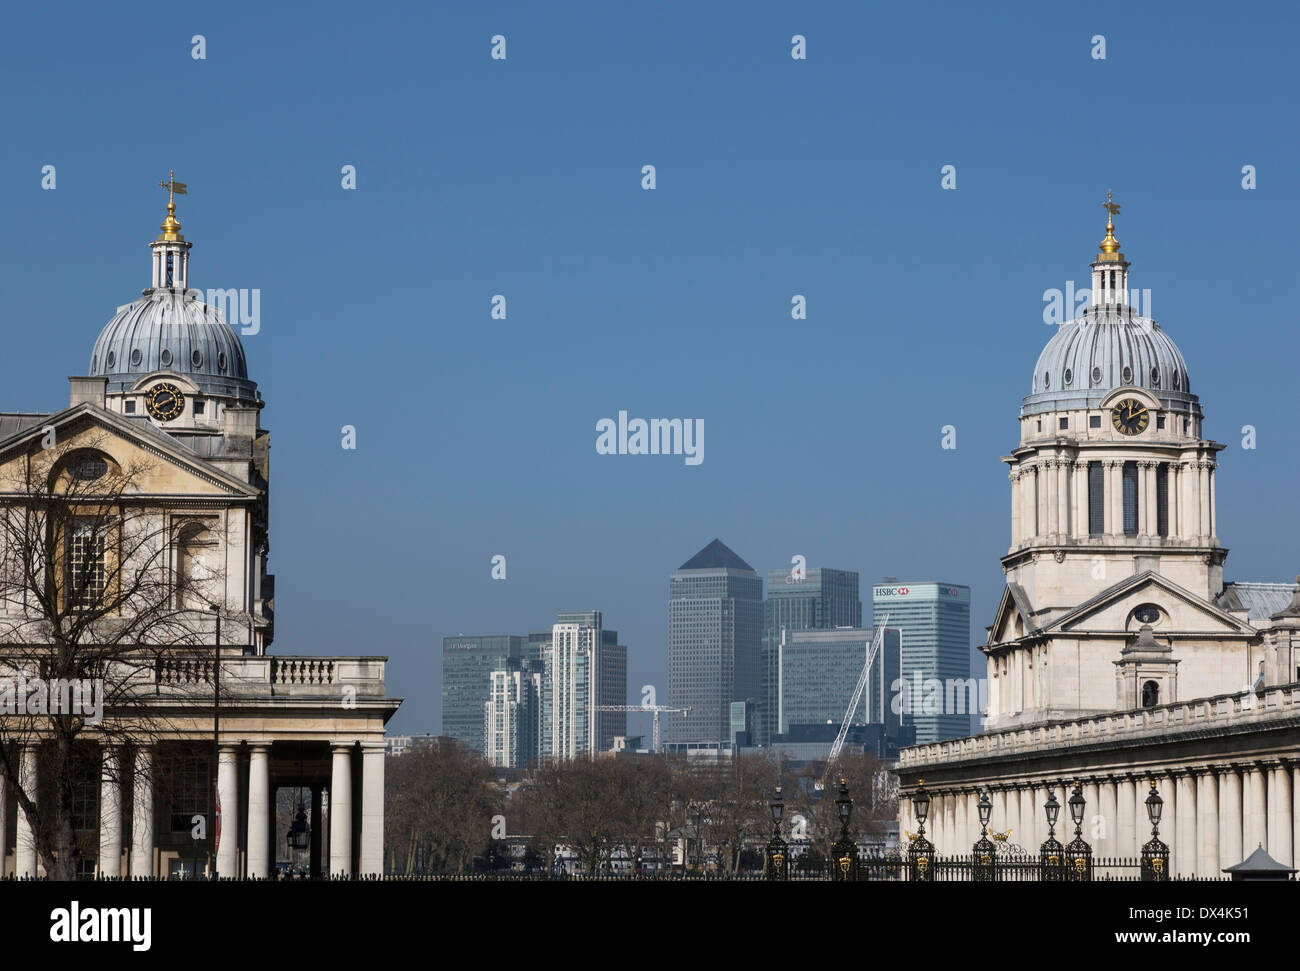 The towers of The Royal Naval College, with the skyline of Canary Wharf in the background. Stock Photo